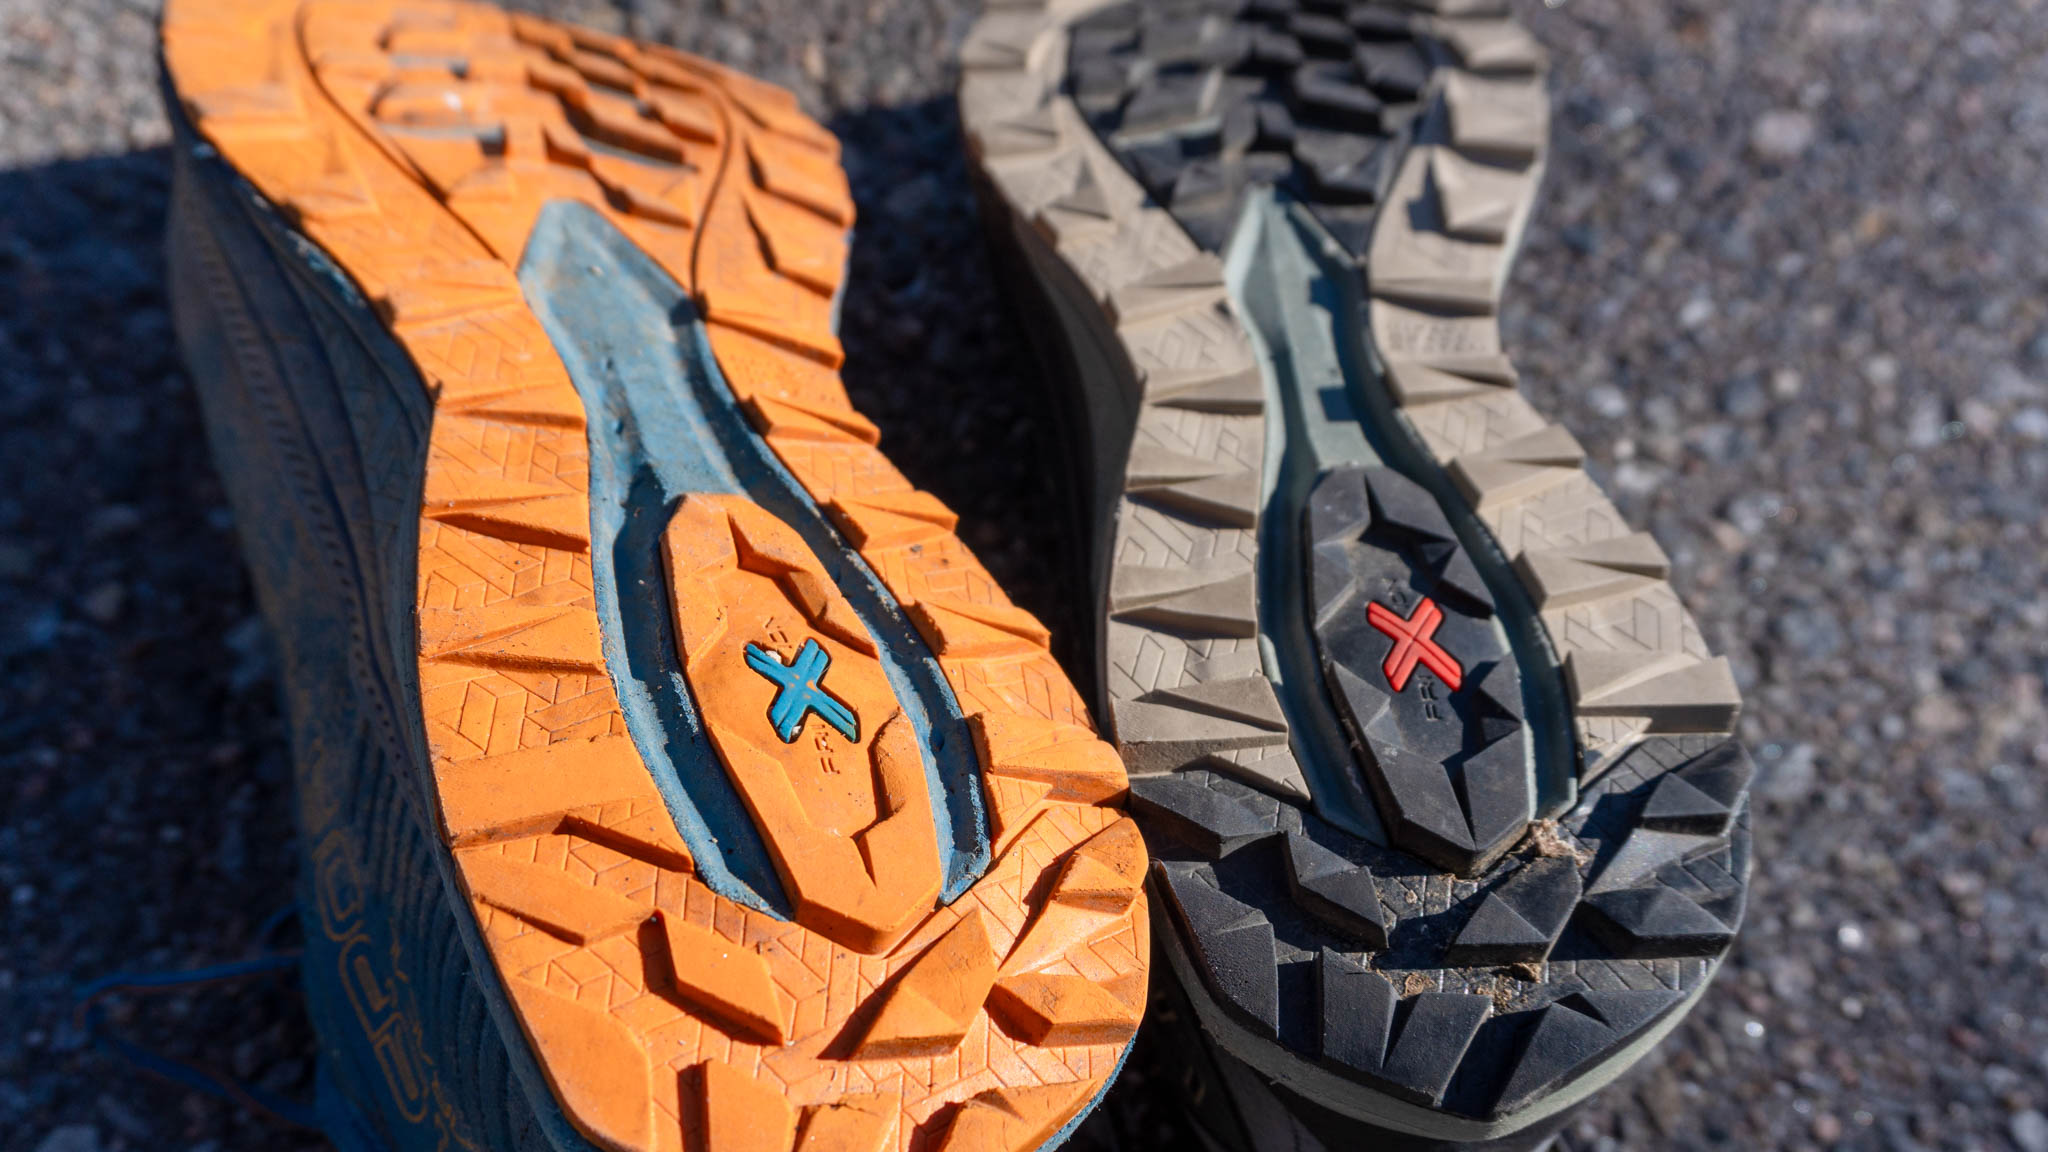 Those the tread pattern is the same, the Karacal (left) and Jackal II (right) use different rubber compounds. The Karacal has been run in far longer than the Jackal II, but shows little difference in wear. 